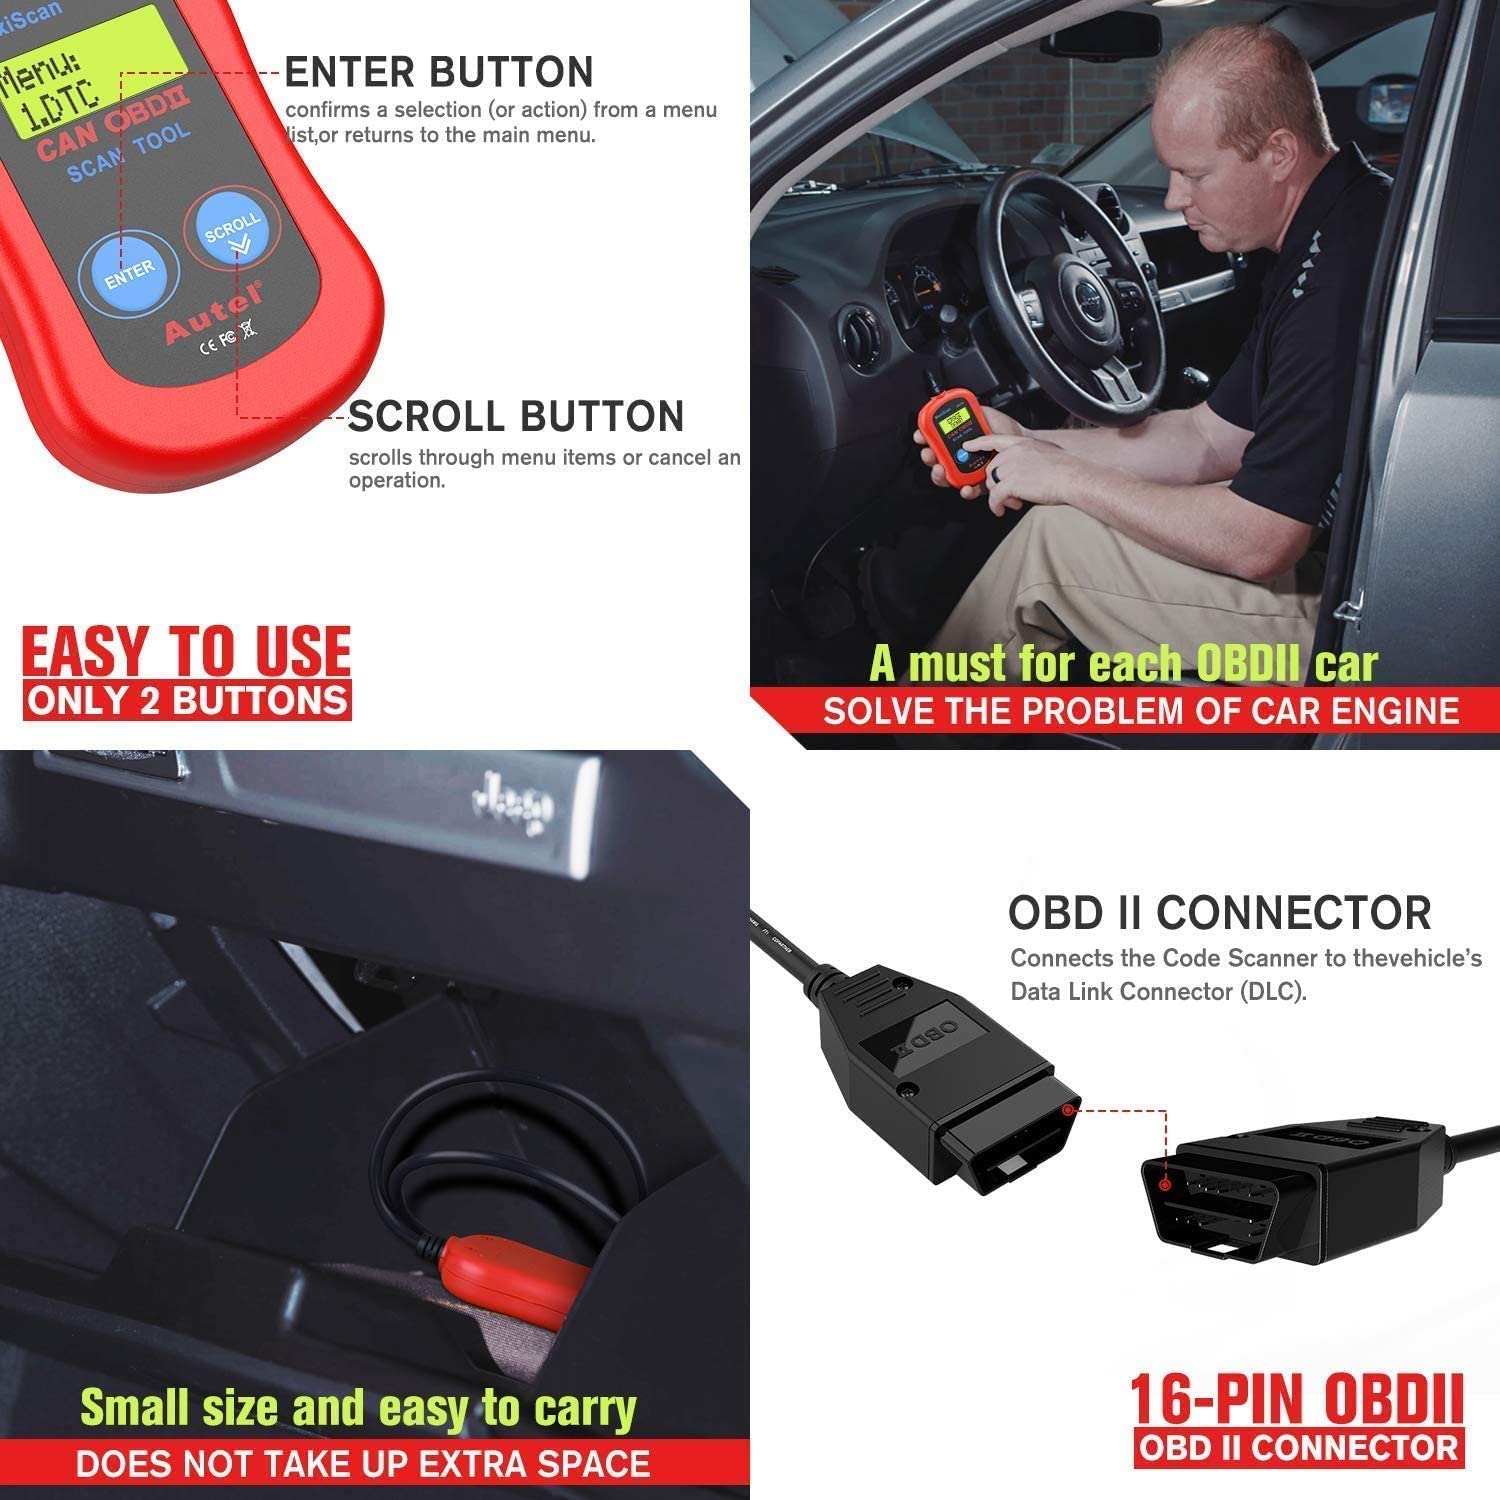 Autel MS300 Universal OBD2 Scanner Car Code Reader Read & Erase Fault Codes Check Emission Monitor Status CAN Vehicles Diagnostic Scan Tool Turn Off Check Engine Light 